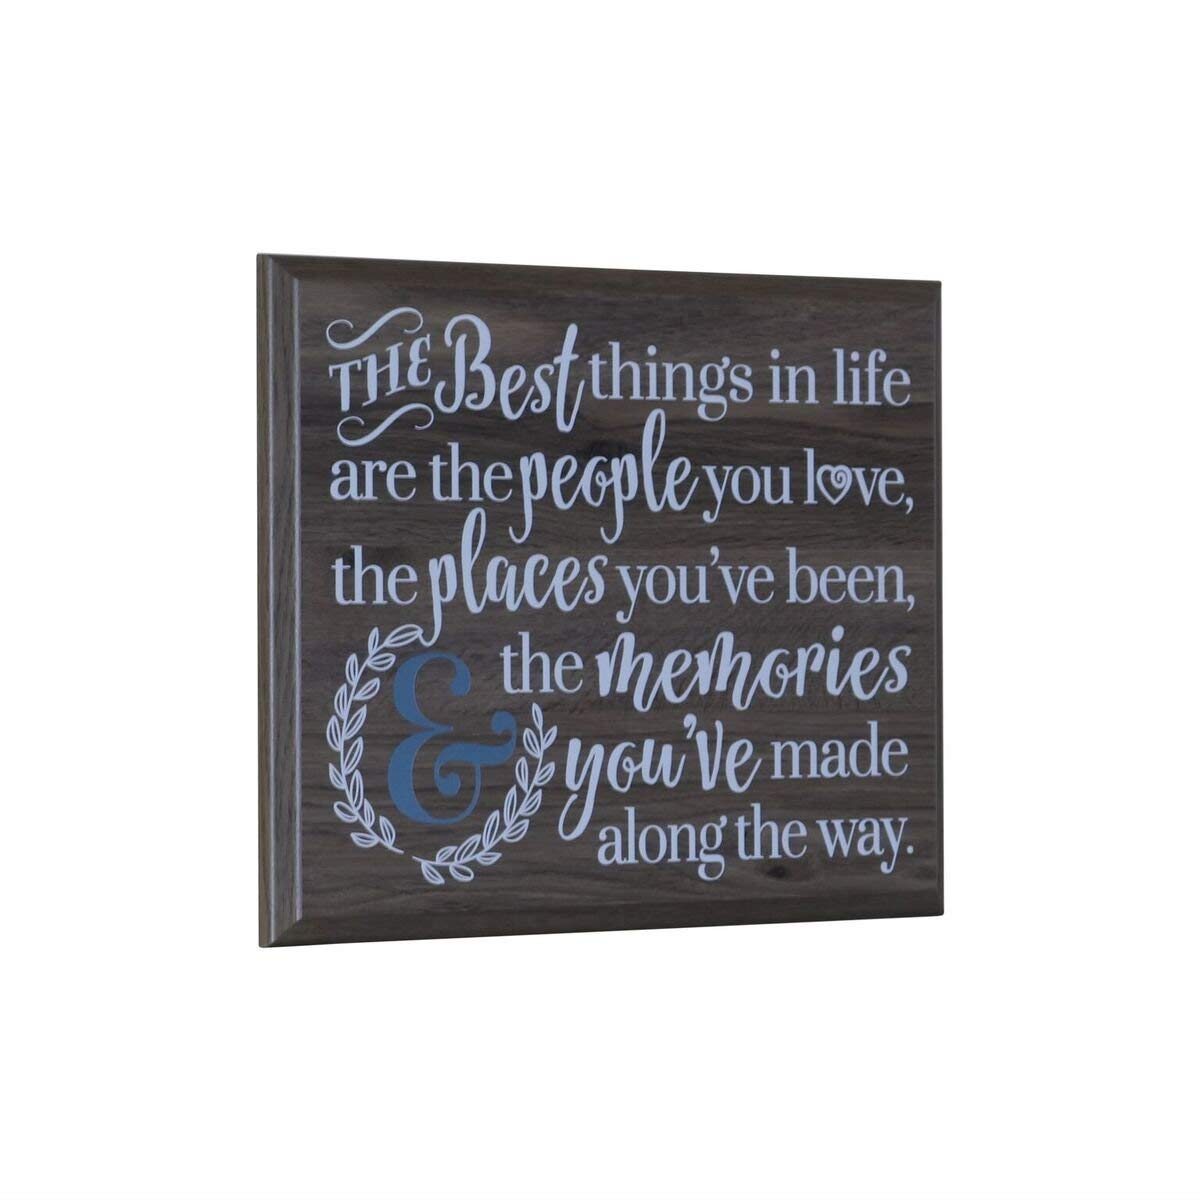 12 x 15 Wall Plaque Decor - The Best Things In Life - LifeSong Milestones